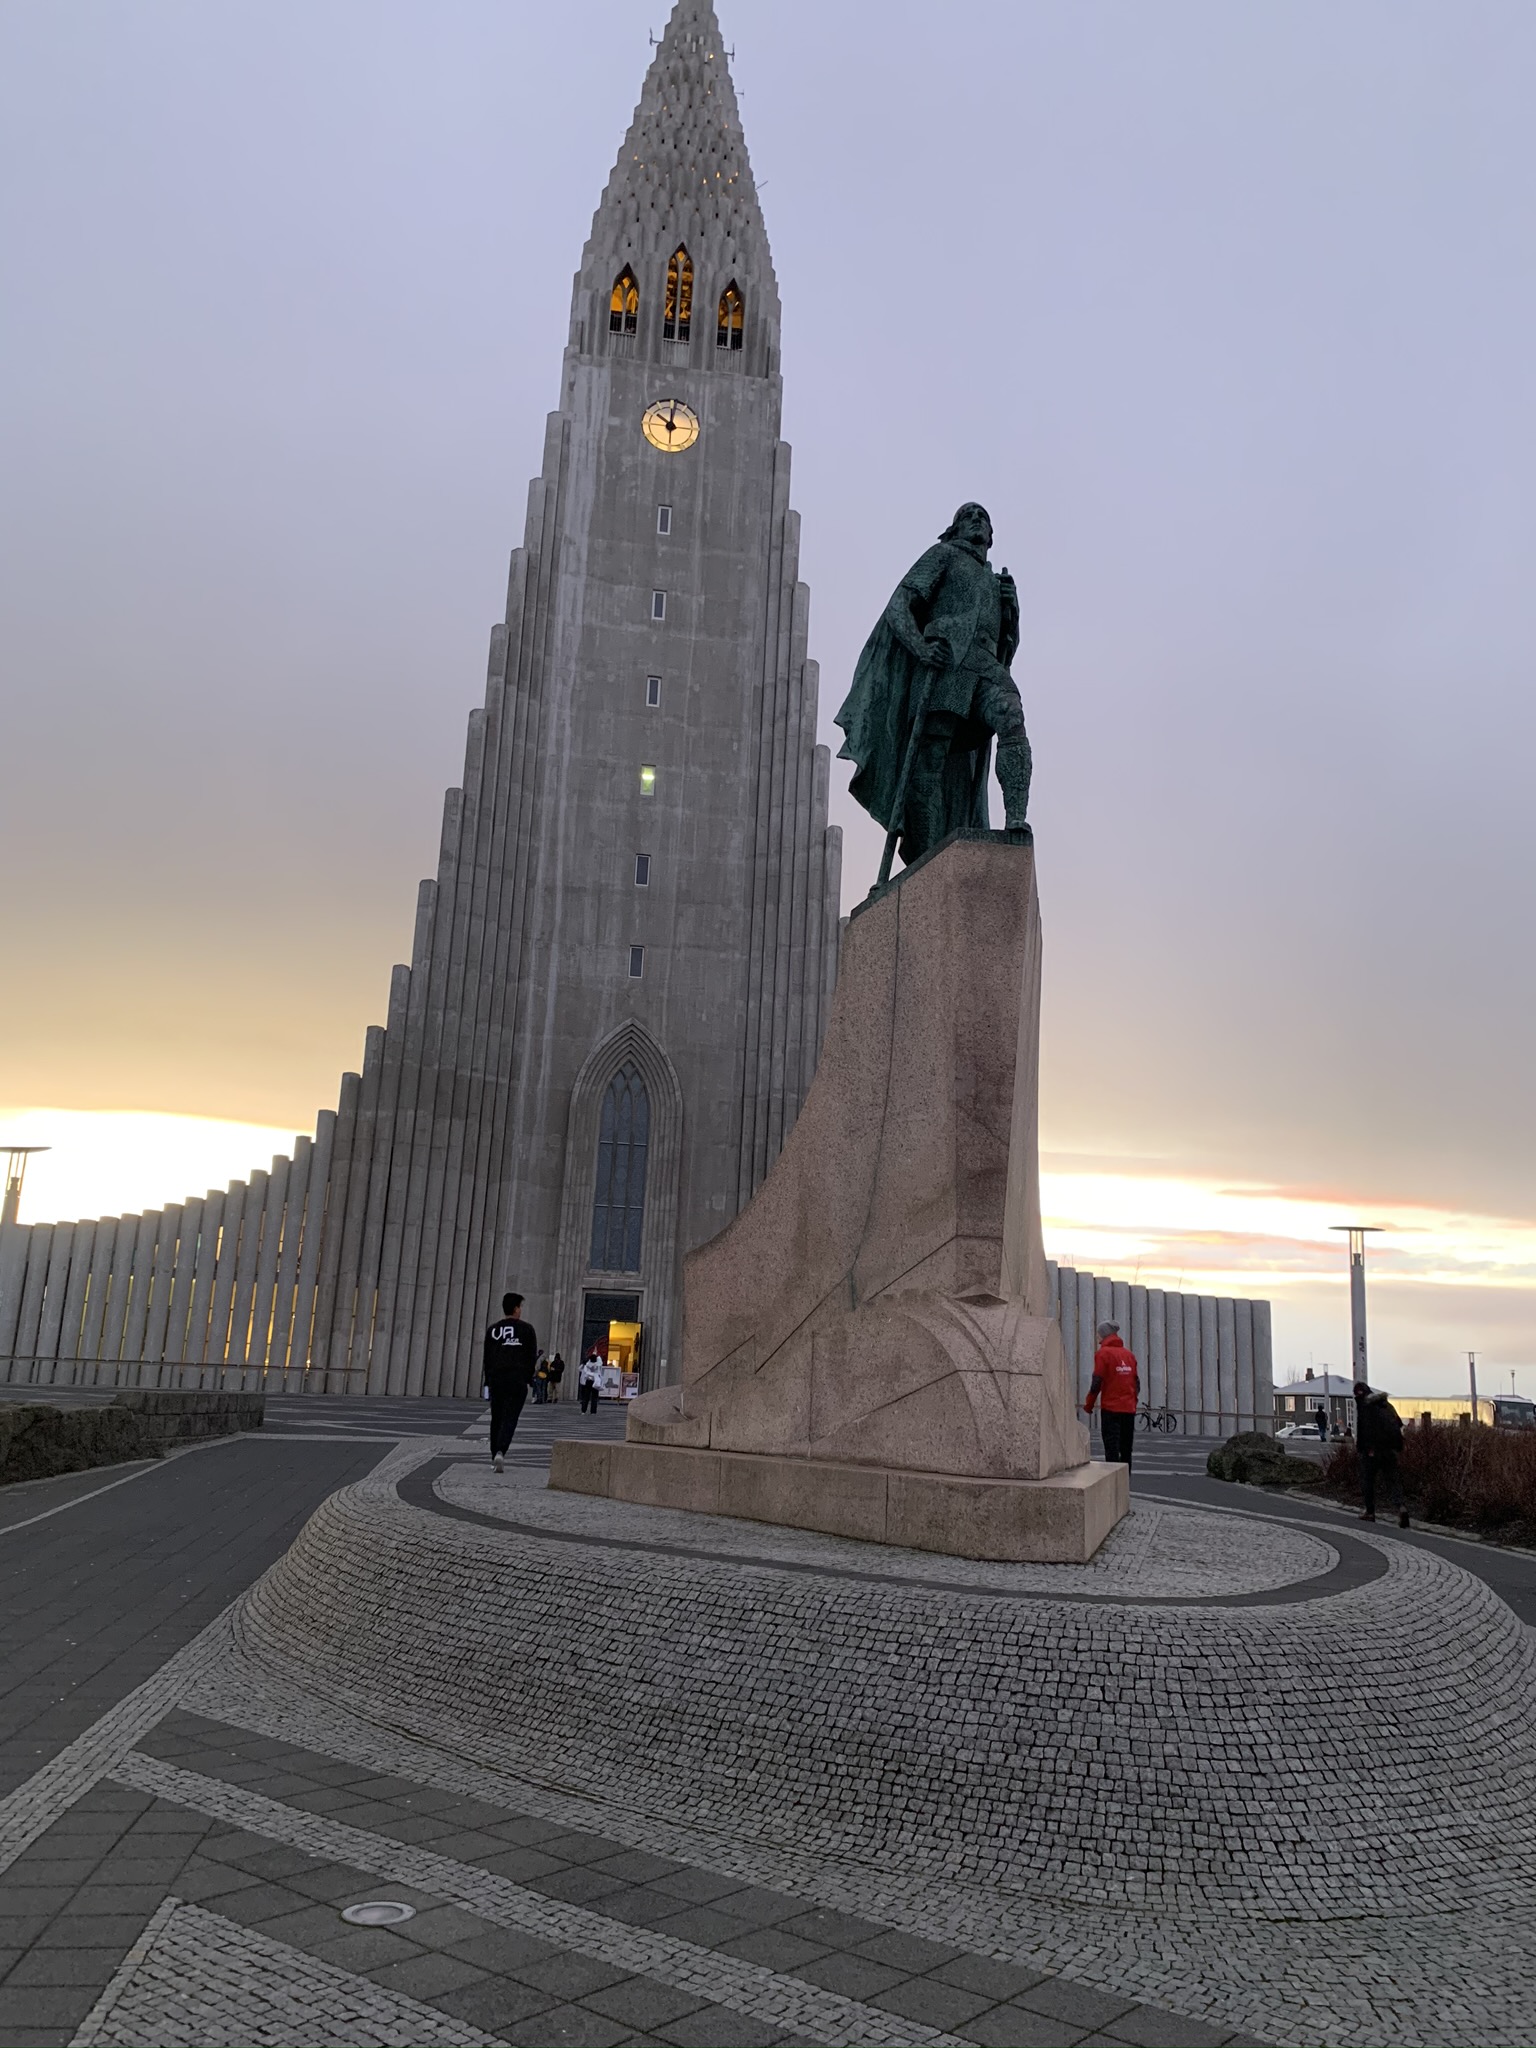 Day 8 – Some Learnings from Iceland …